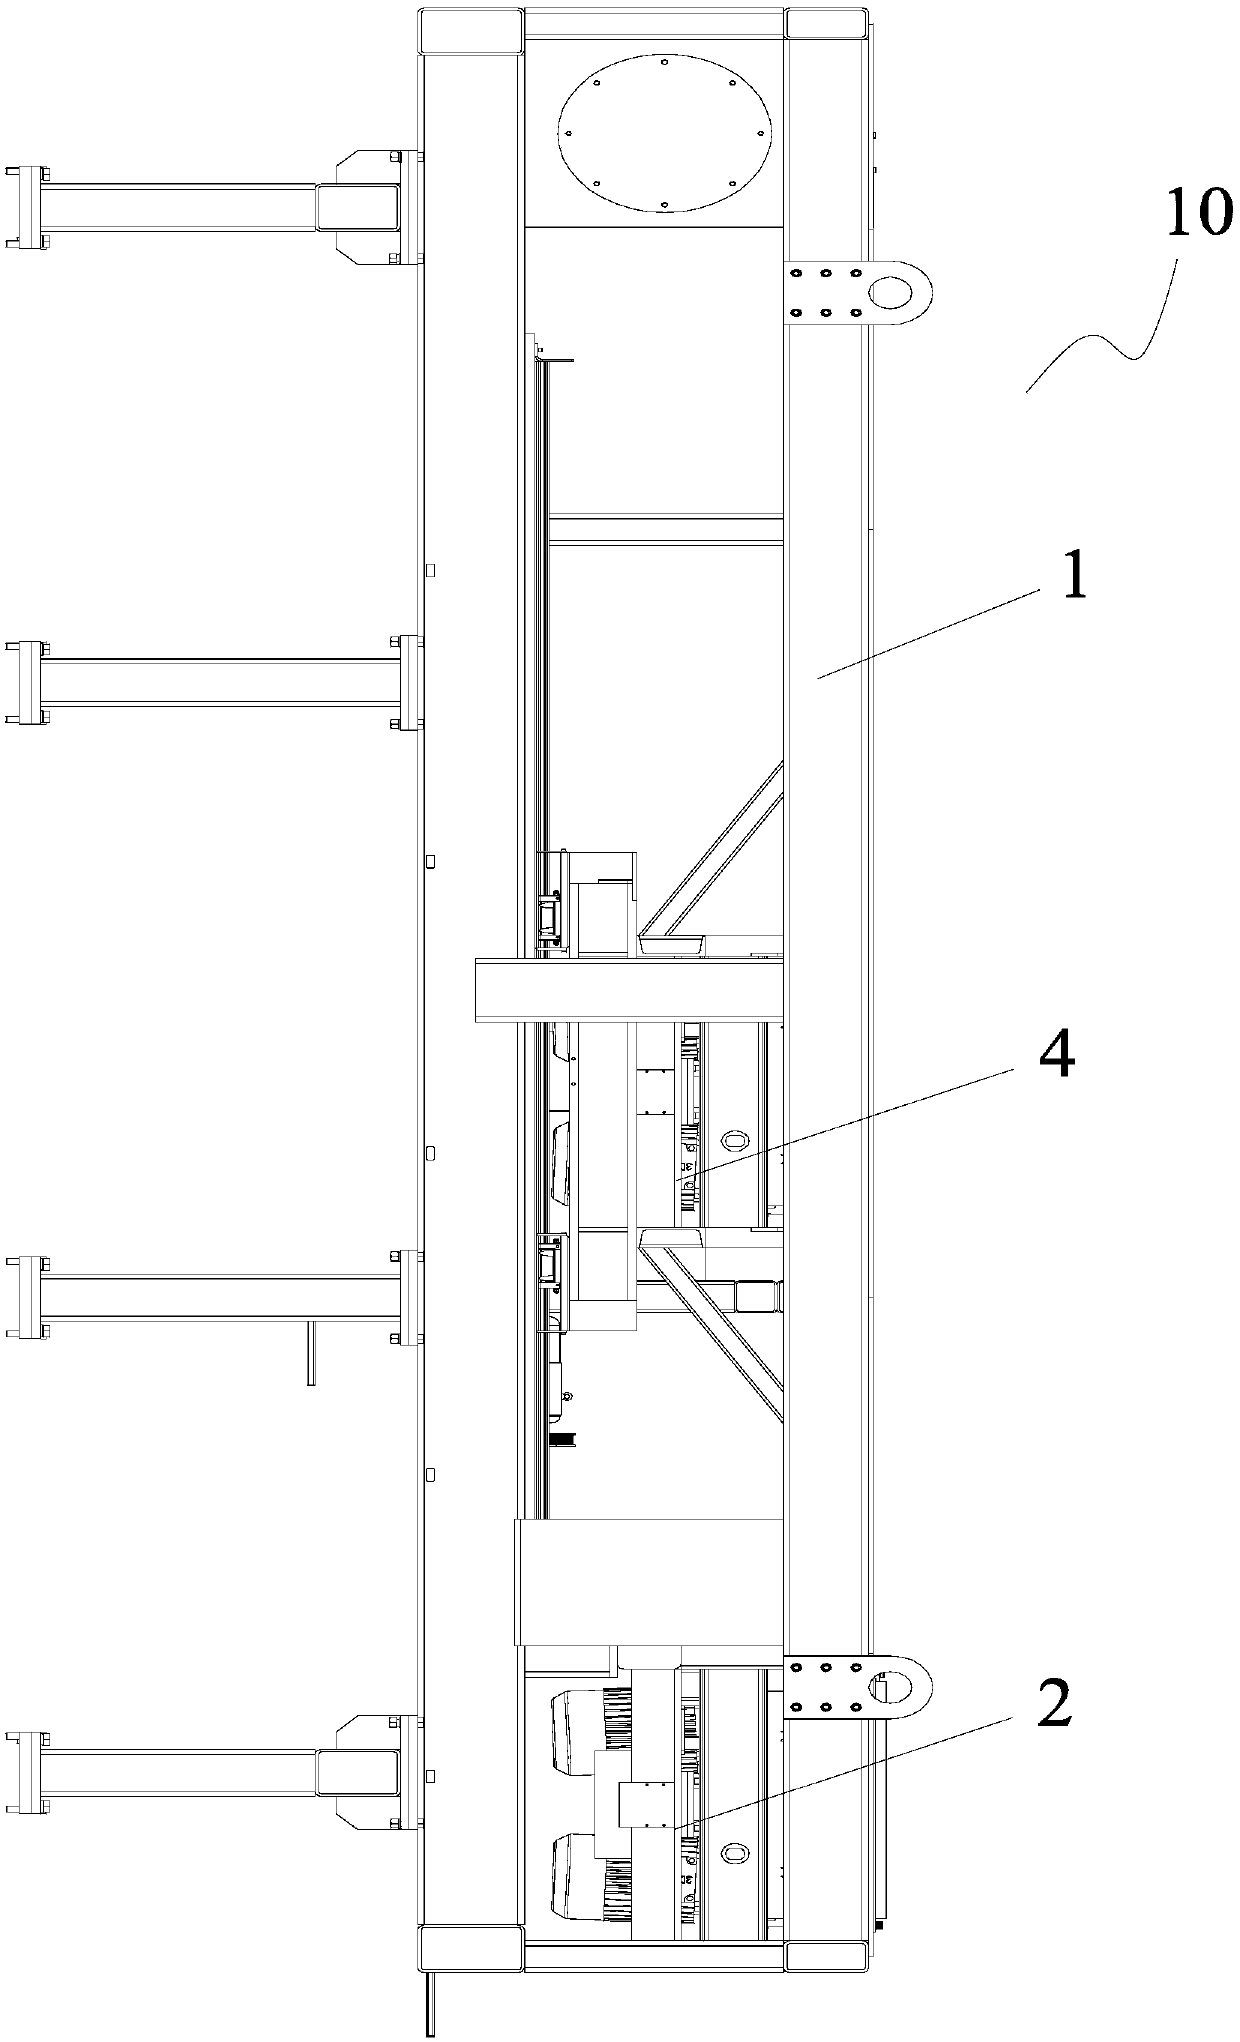 Biaxial brake table and vehicle testing equipment with the same